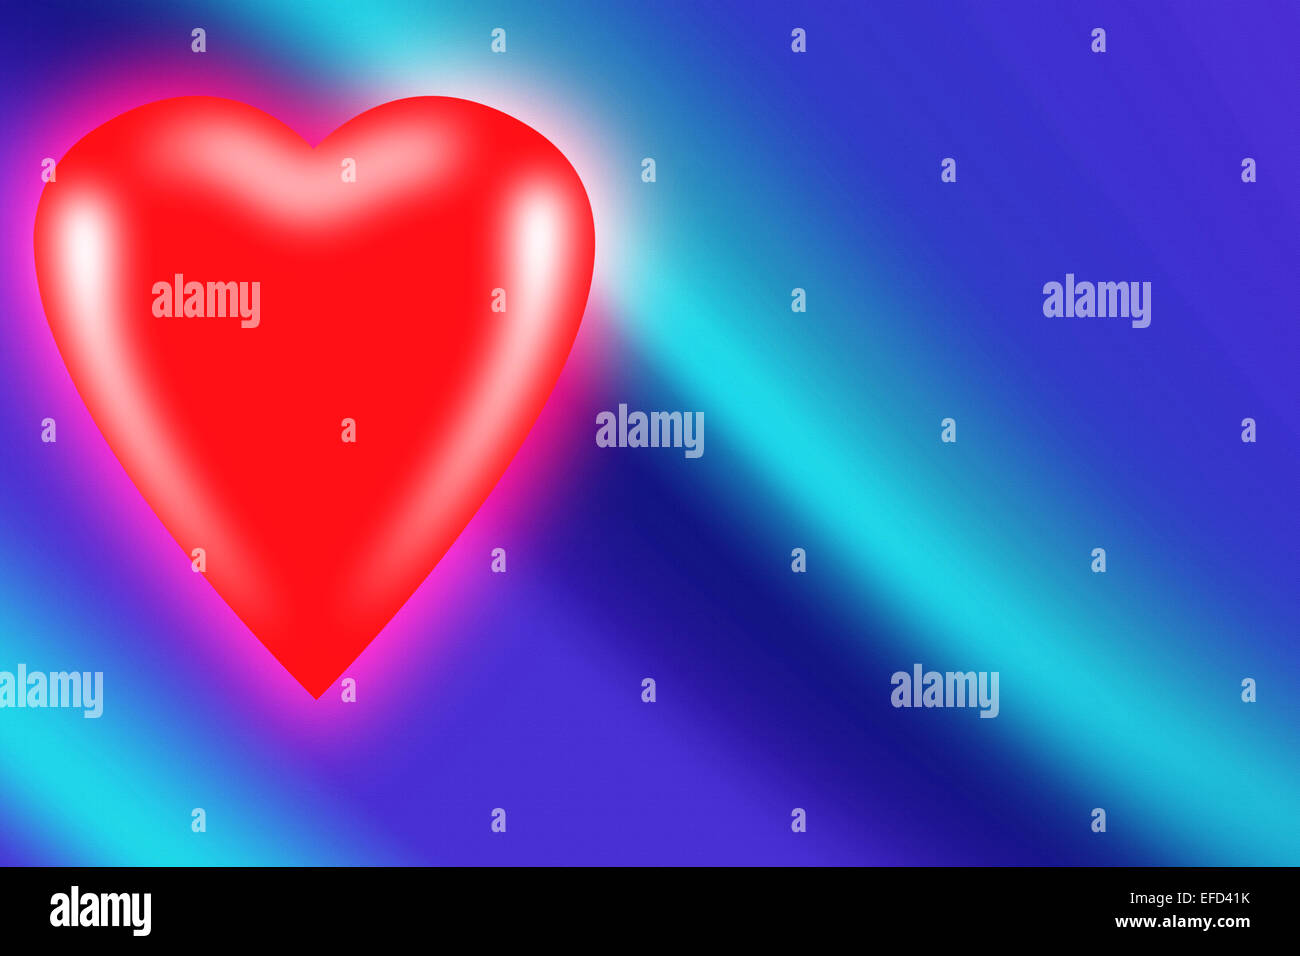 Red heart on a blue graduated patterned background. The heart is separated from the background by a diffuse magenta glow Stock Photo